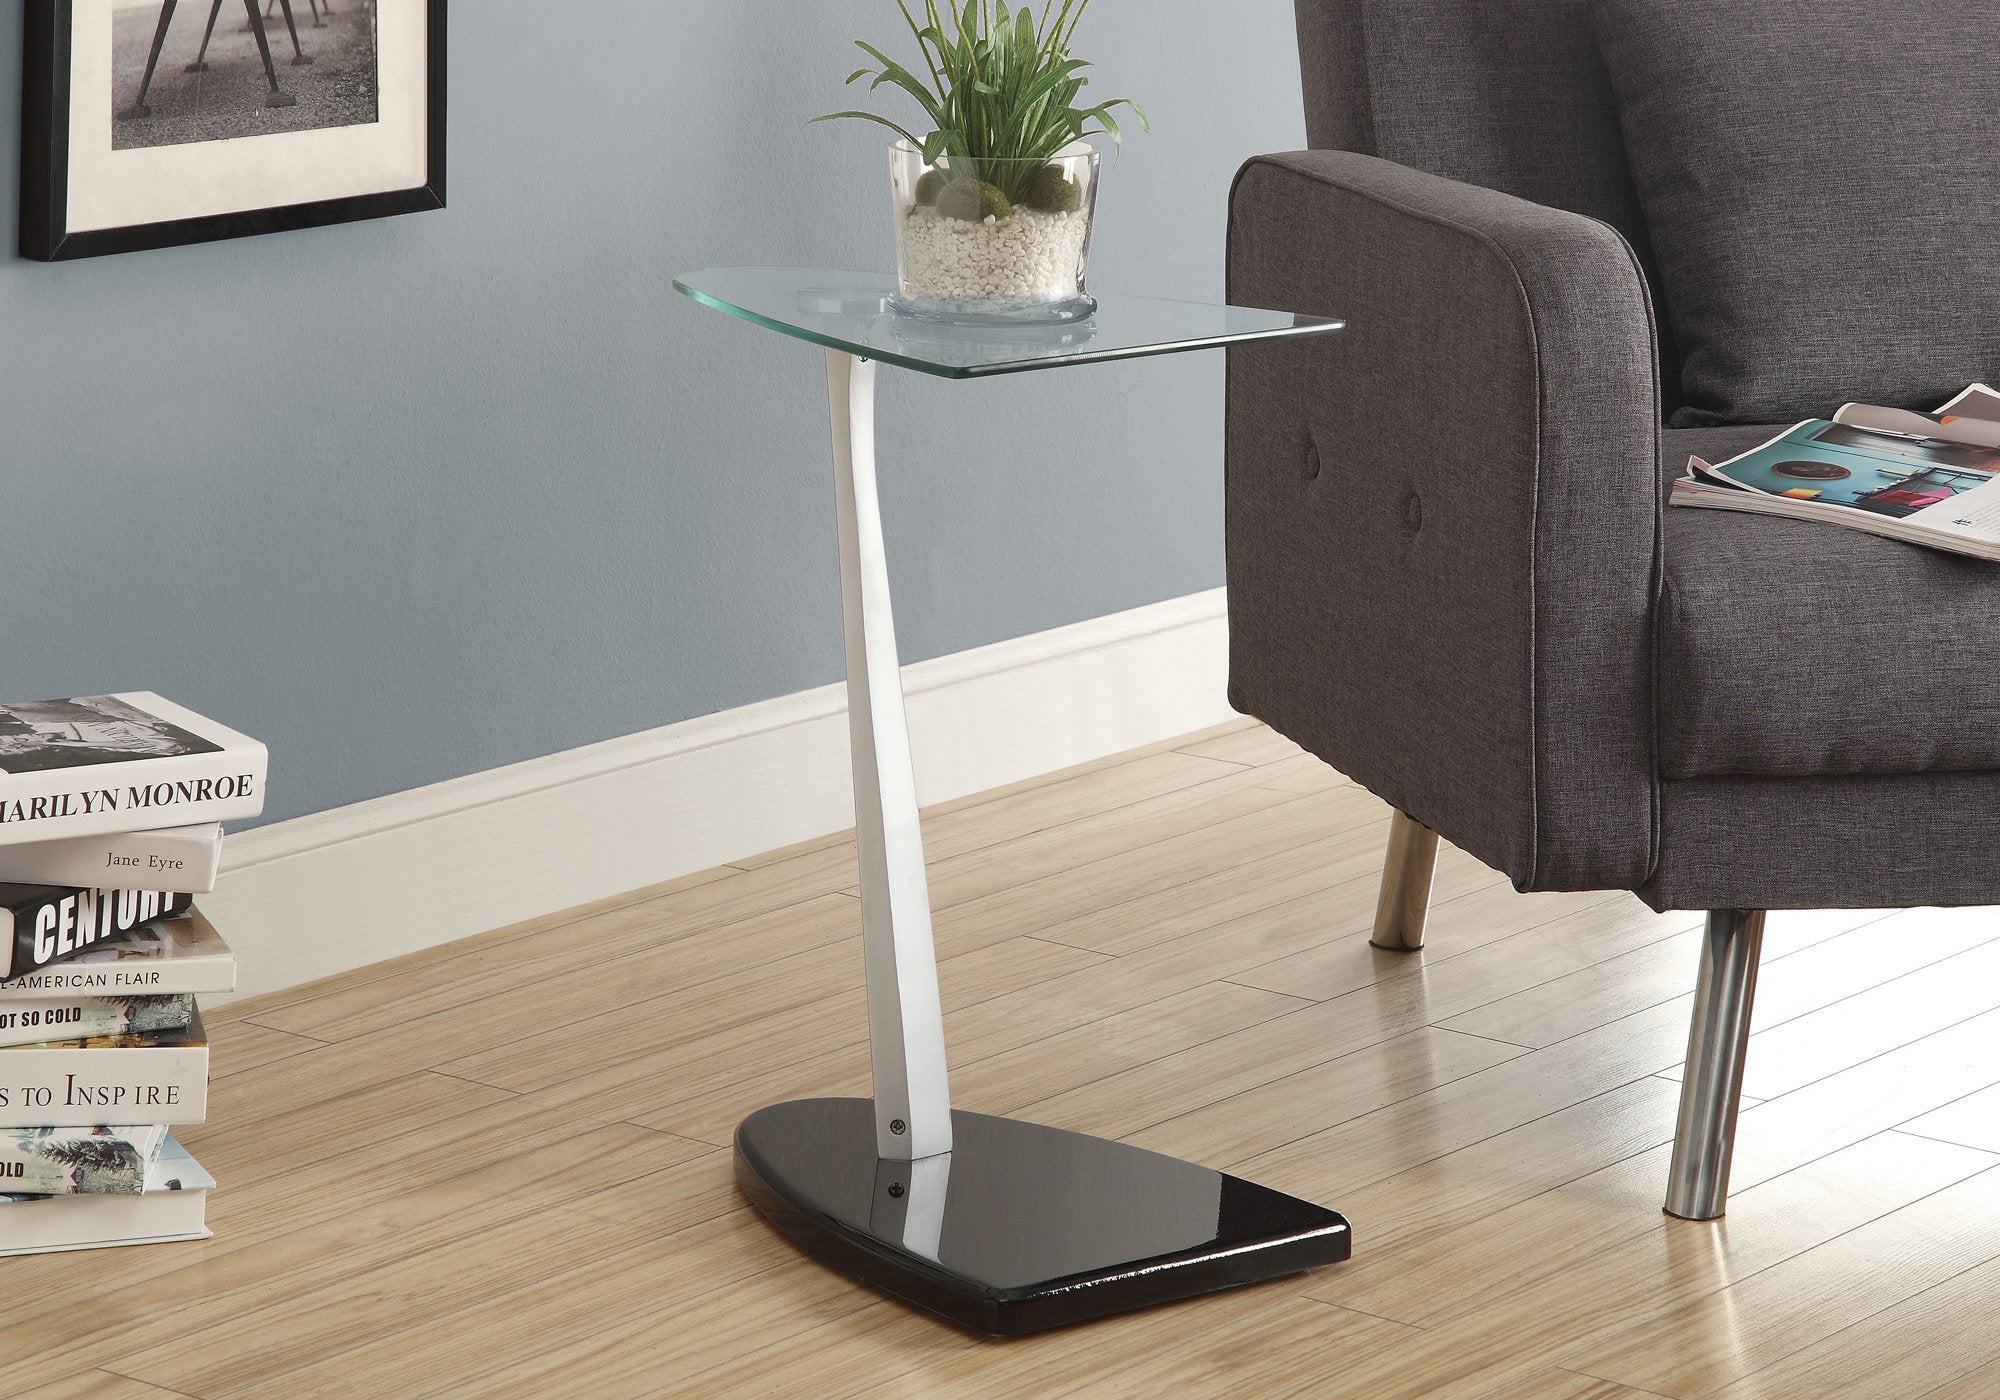 MN-923047    Accent Table, Side, End, Plsant Stand, Square, Living Room, Bedroom, Laminate, Tempered Glass, Glossy Black, Black, Contemporary, Modern